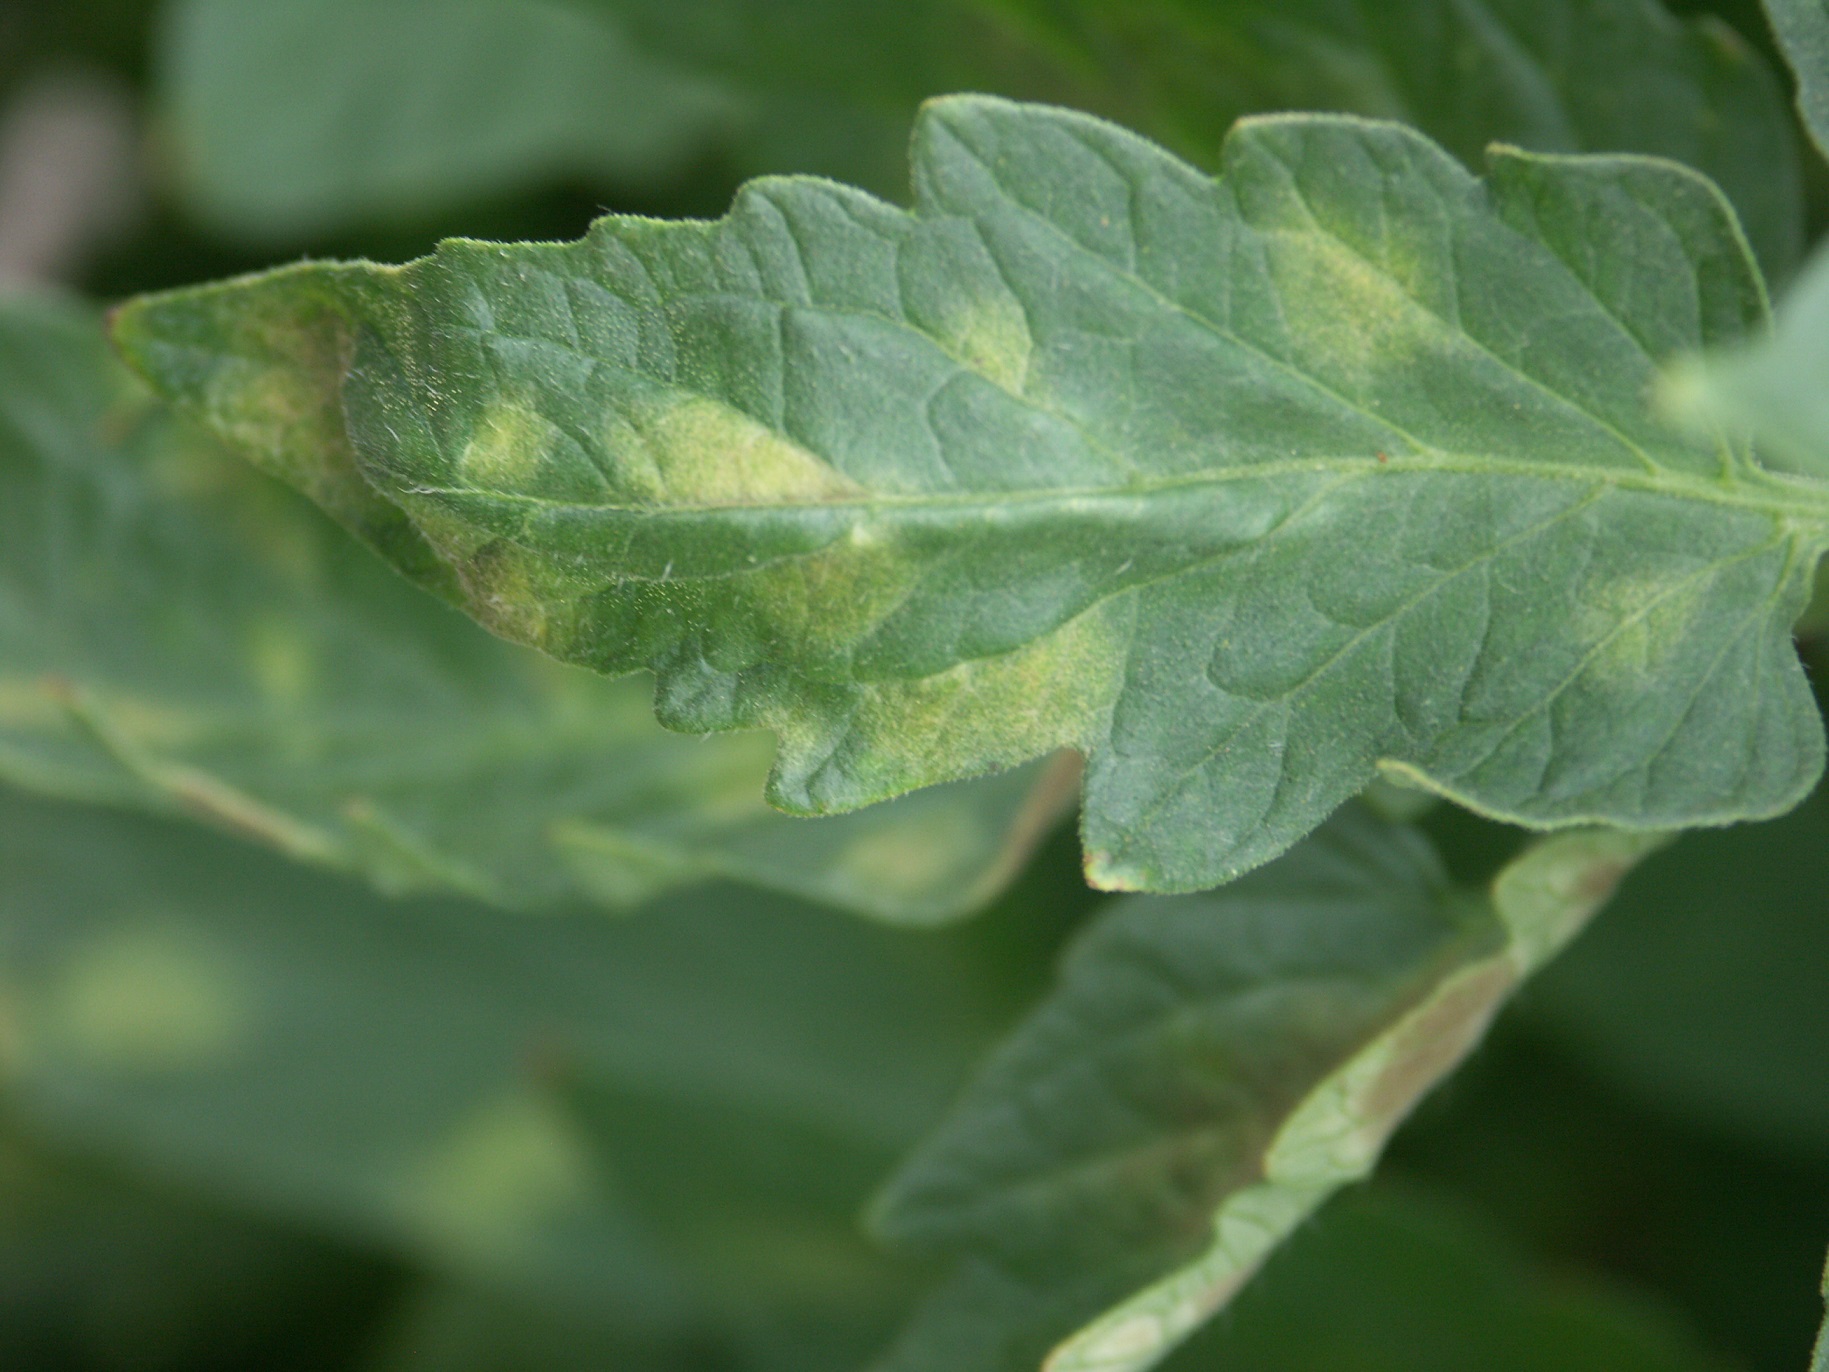 Underside of leaf with sporulation of causal fungus visible for tomato leaf mold.